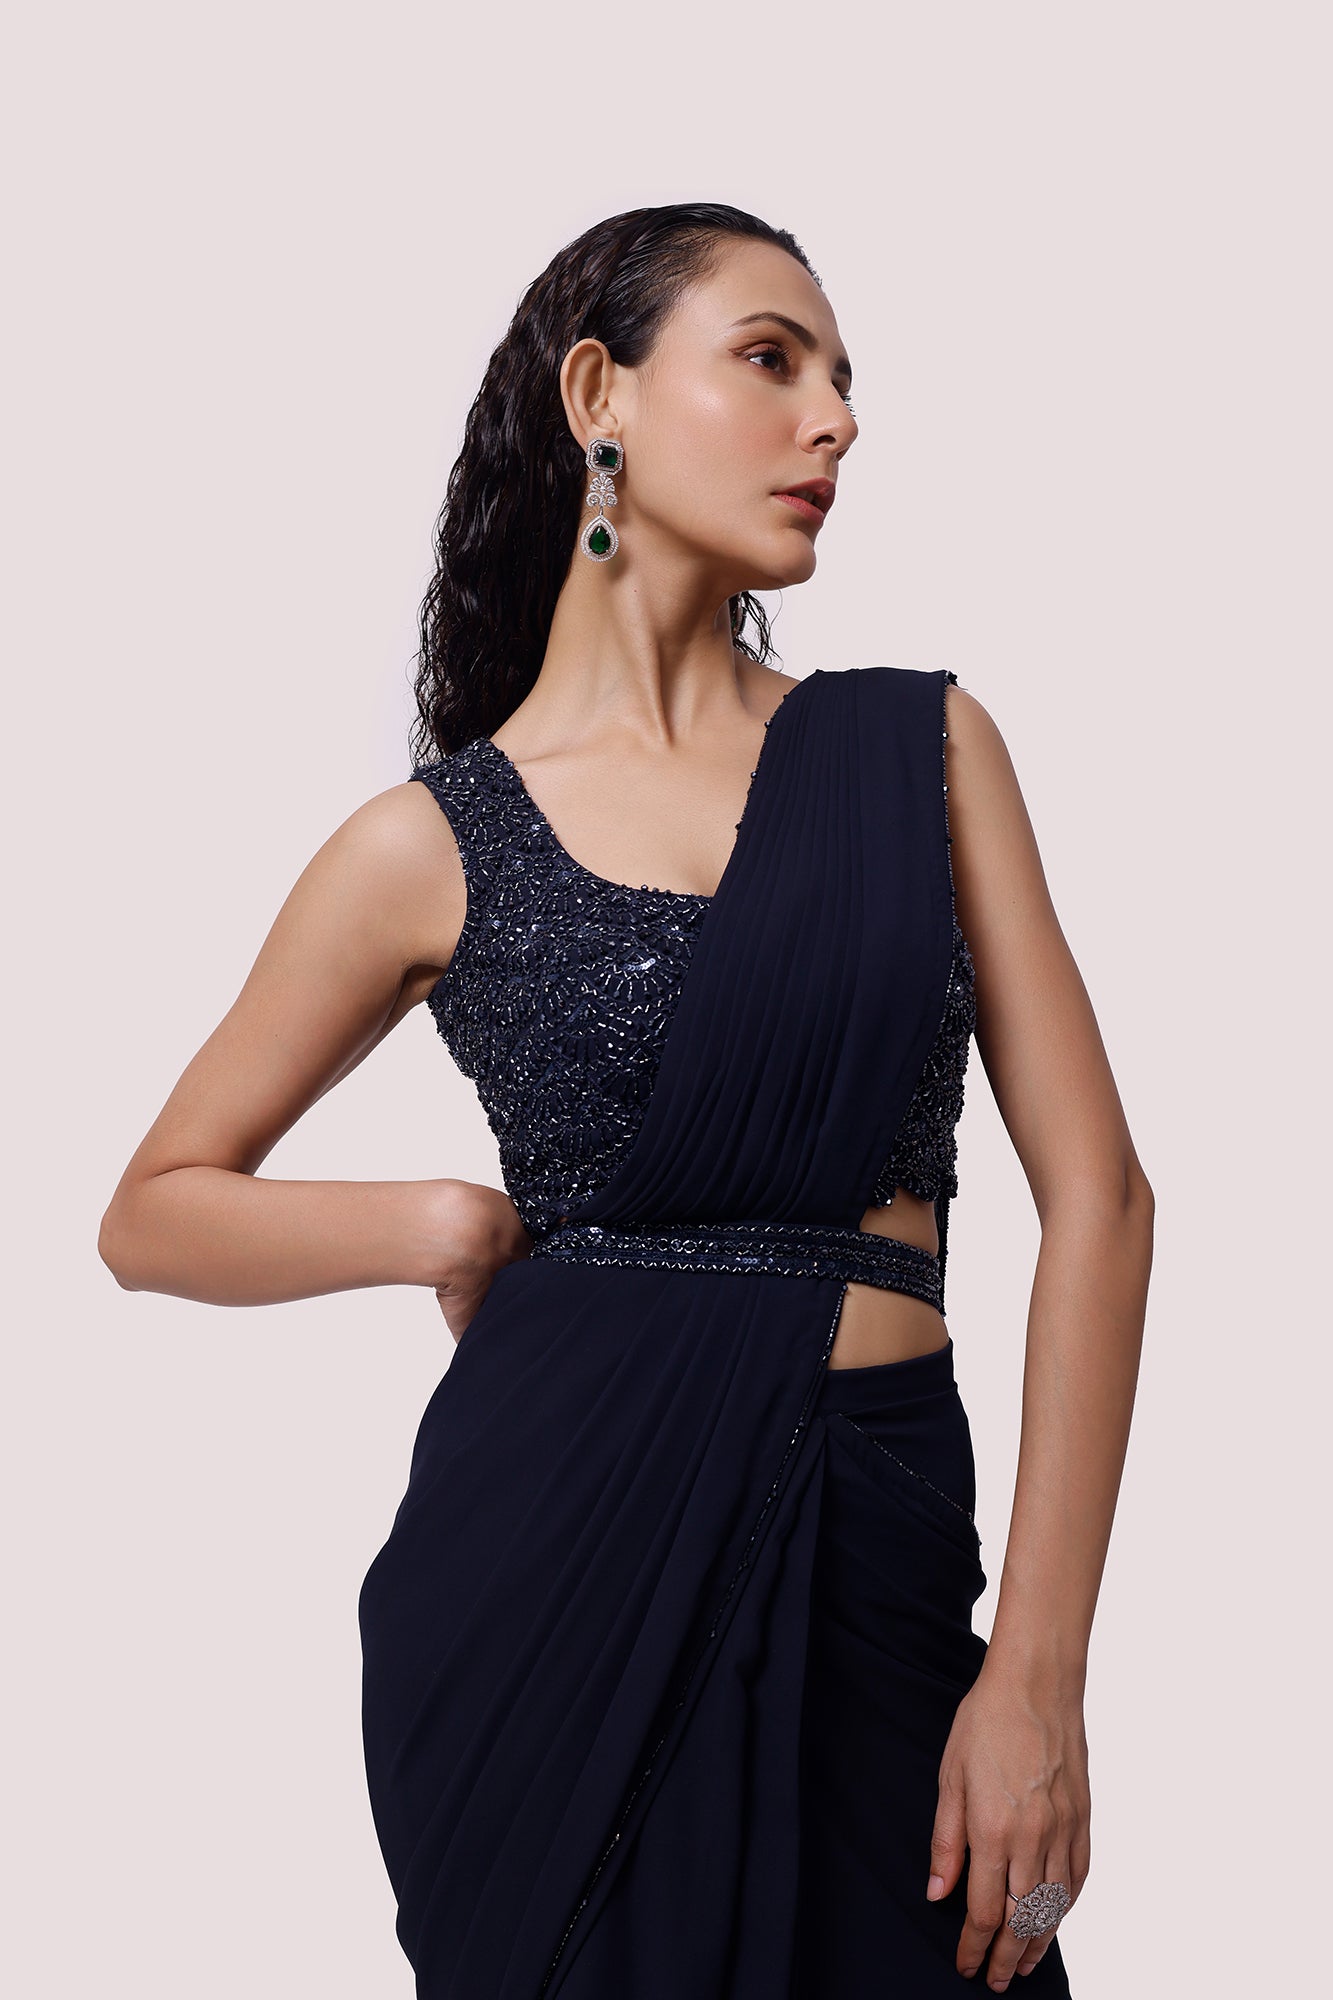 Buy navy blue embellished georgette saree online in USA with belt. Look your best at parties and weddings in beautiful designer sarees, embroidered sarees, handwoven sarees, silk sarees, organza saris from Pure Elegance Indian saree store in USA.-closeup